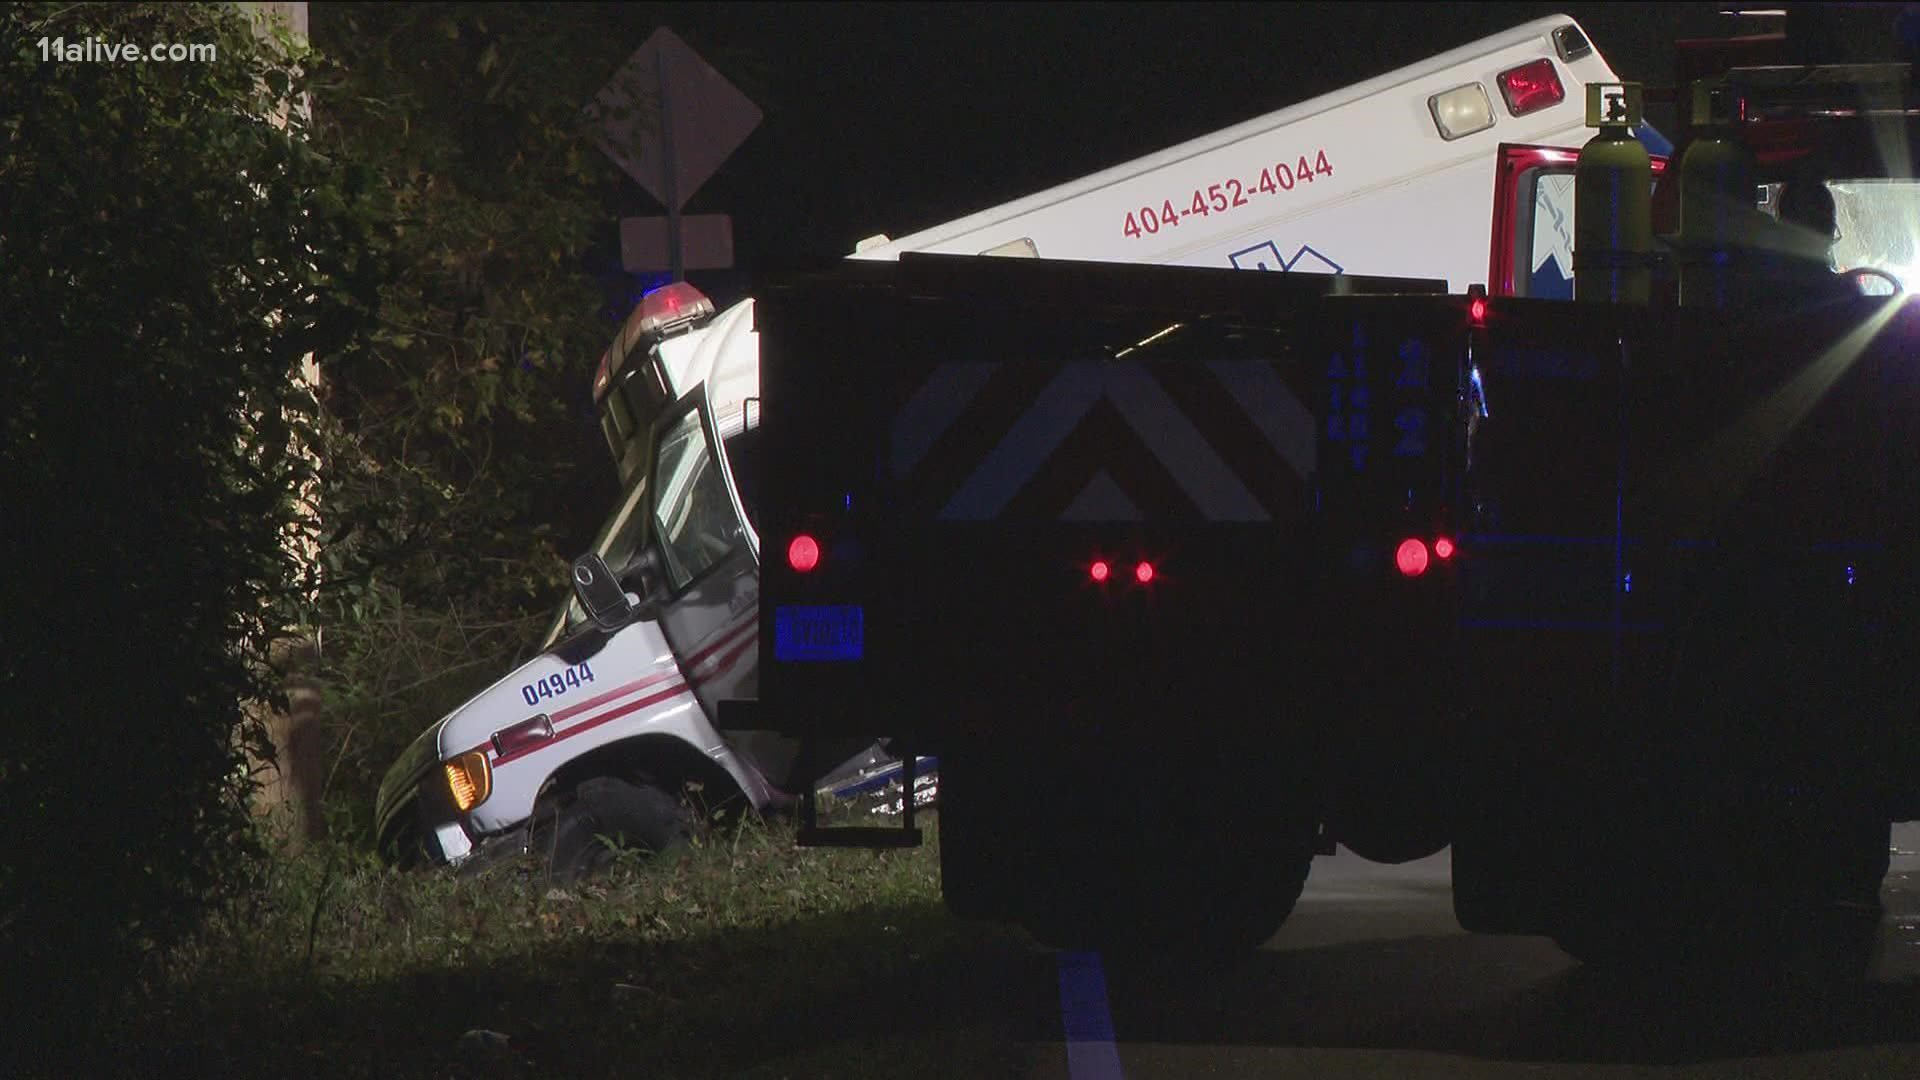 Authorities said an ambulance patient, 66-year-old Wilton Thomason, died when the ambulance overturned into a ditch.